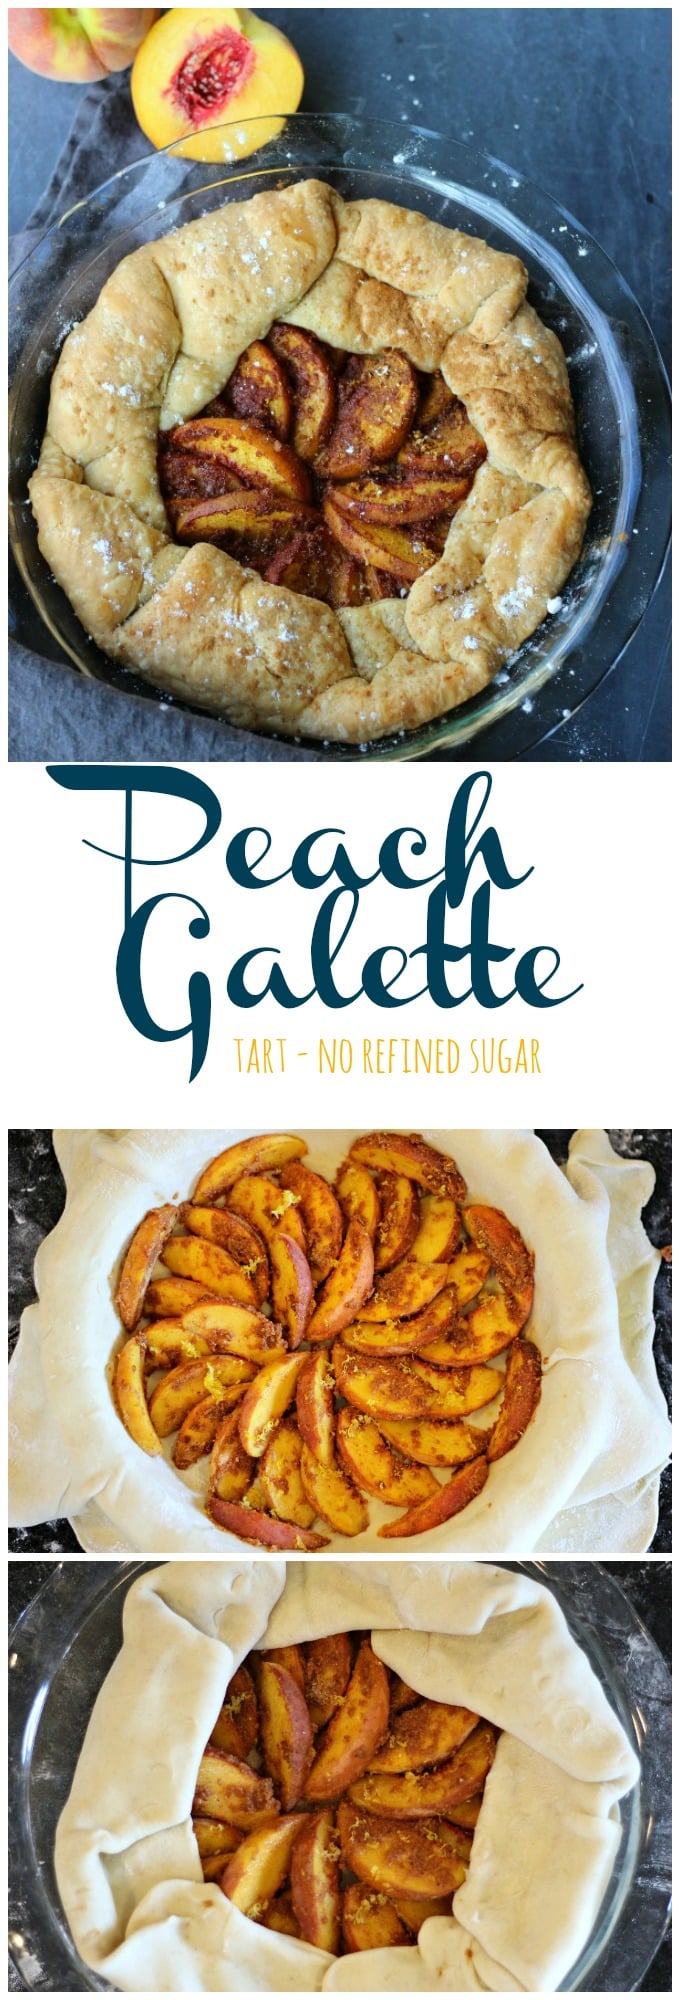 This peach galette in rustic tart baked in a buttery flaky pastry is everything you've always wanted. Few ingredients and no refined sugars, this doesn't get any better! gardeninthekitchen.com 